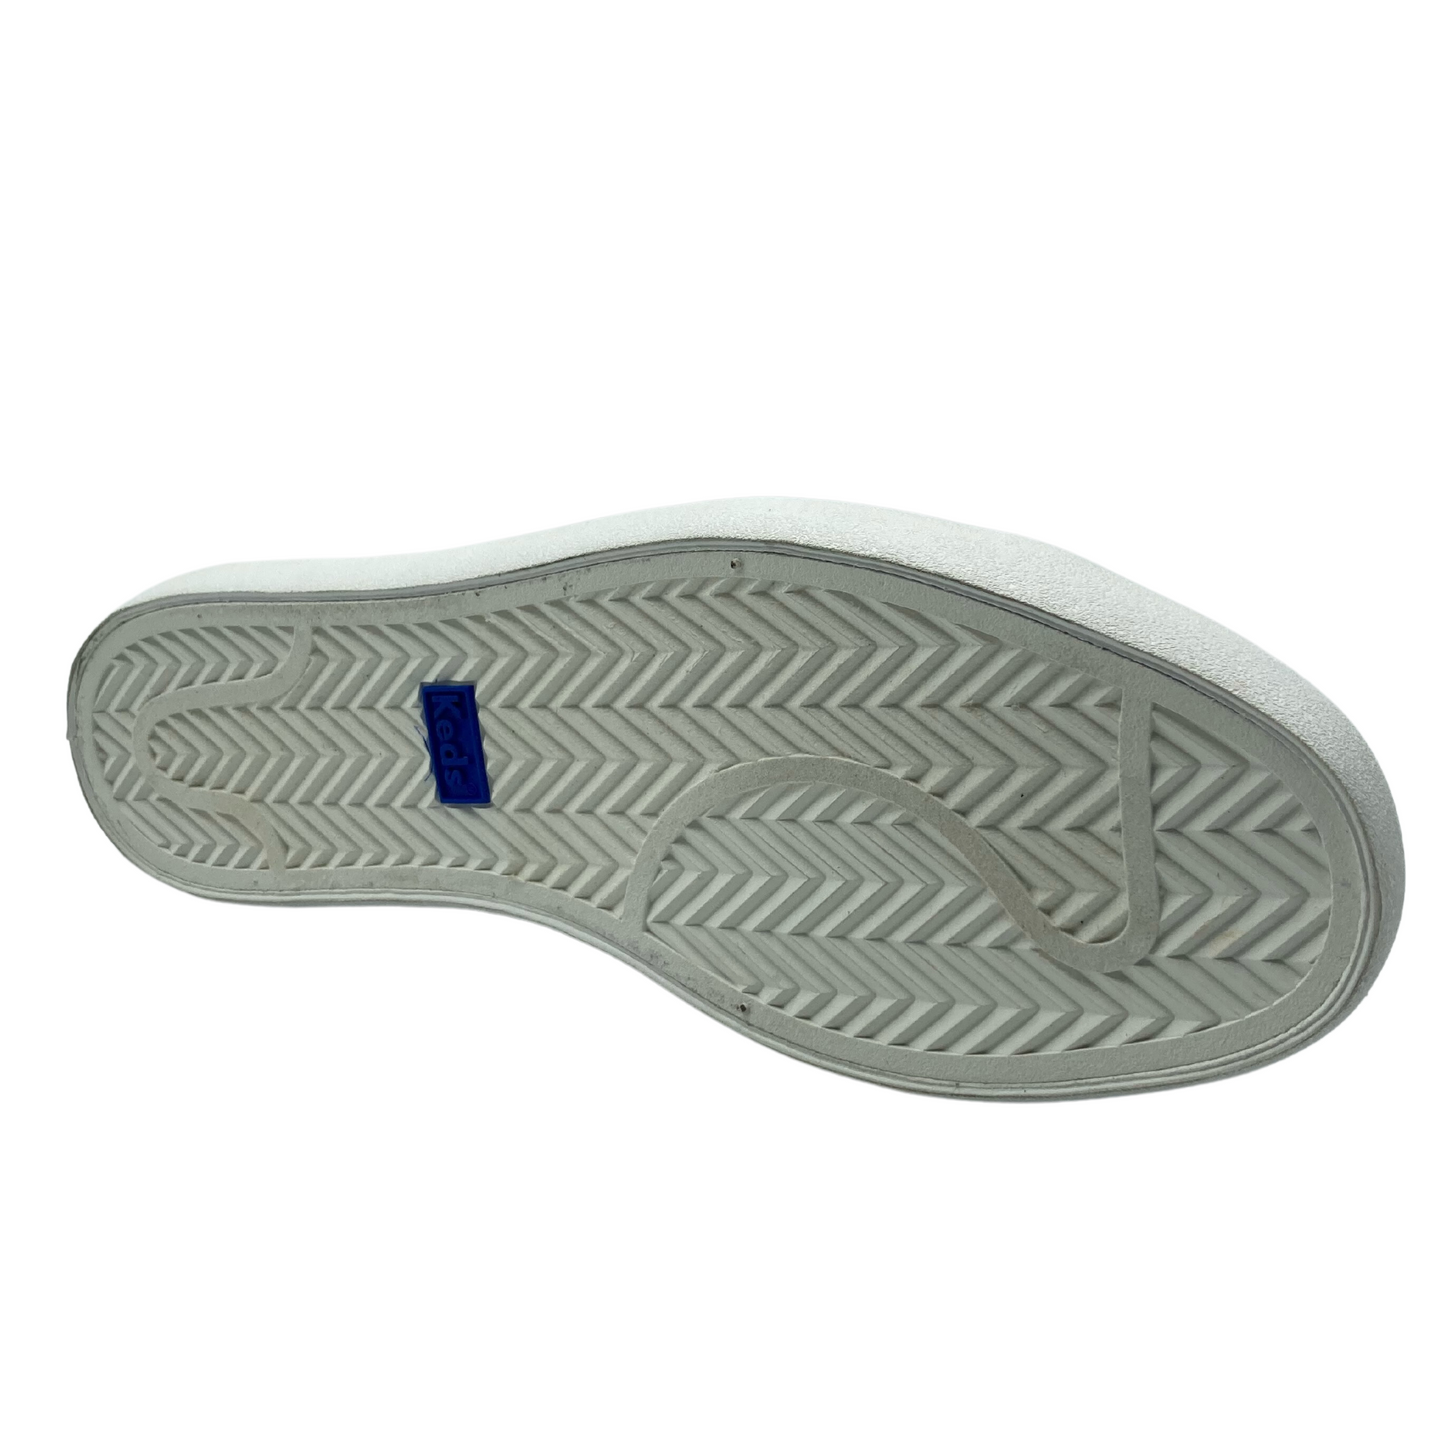 Bottom of the pull on sneaker with white tread and small rectangular blue logo